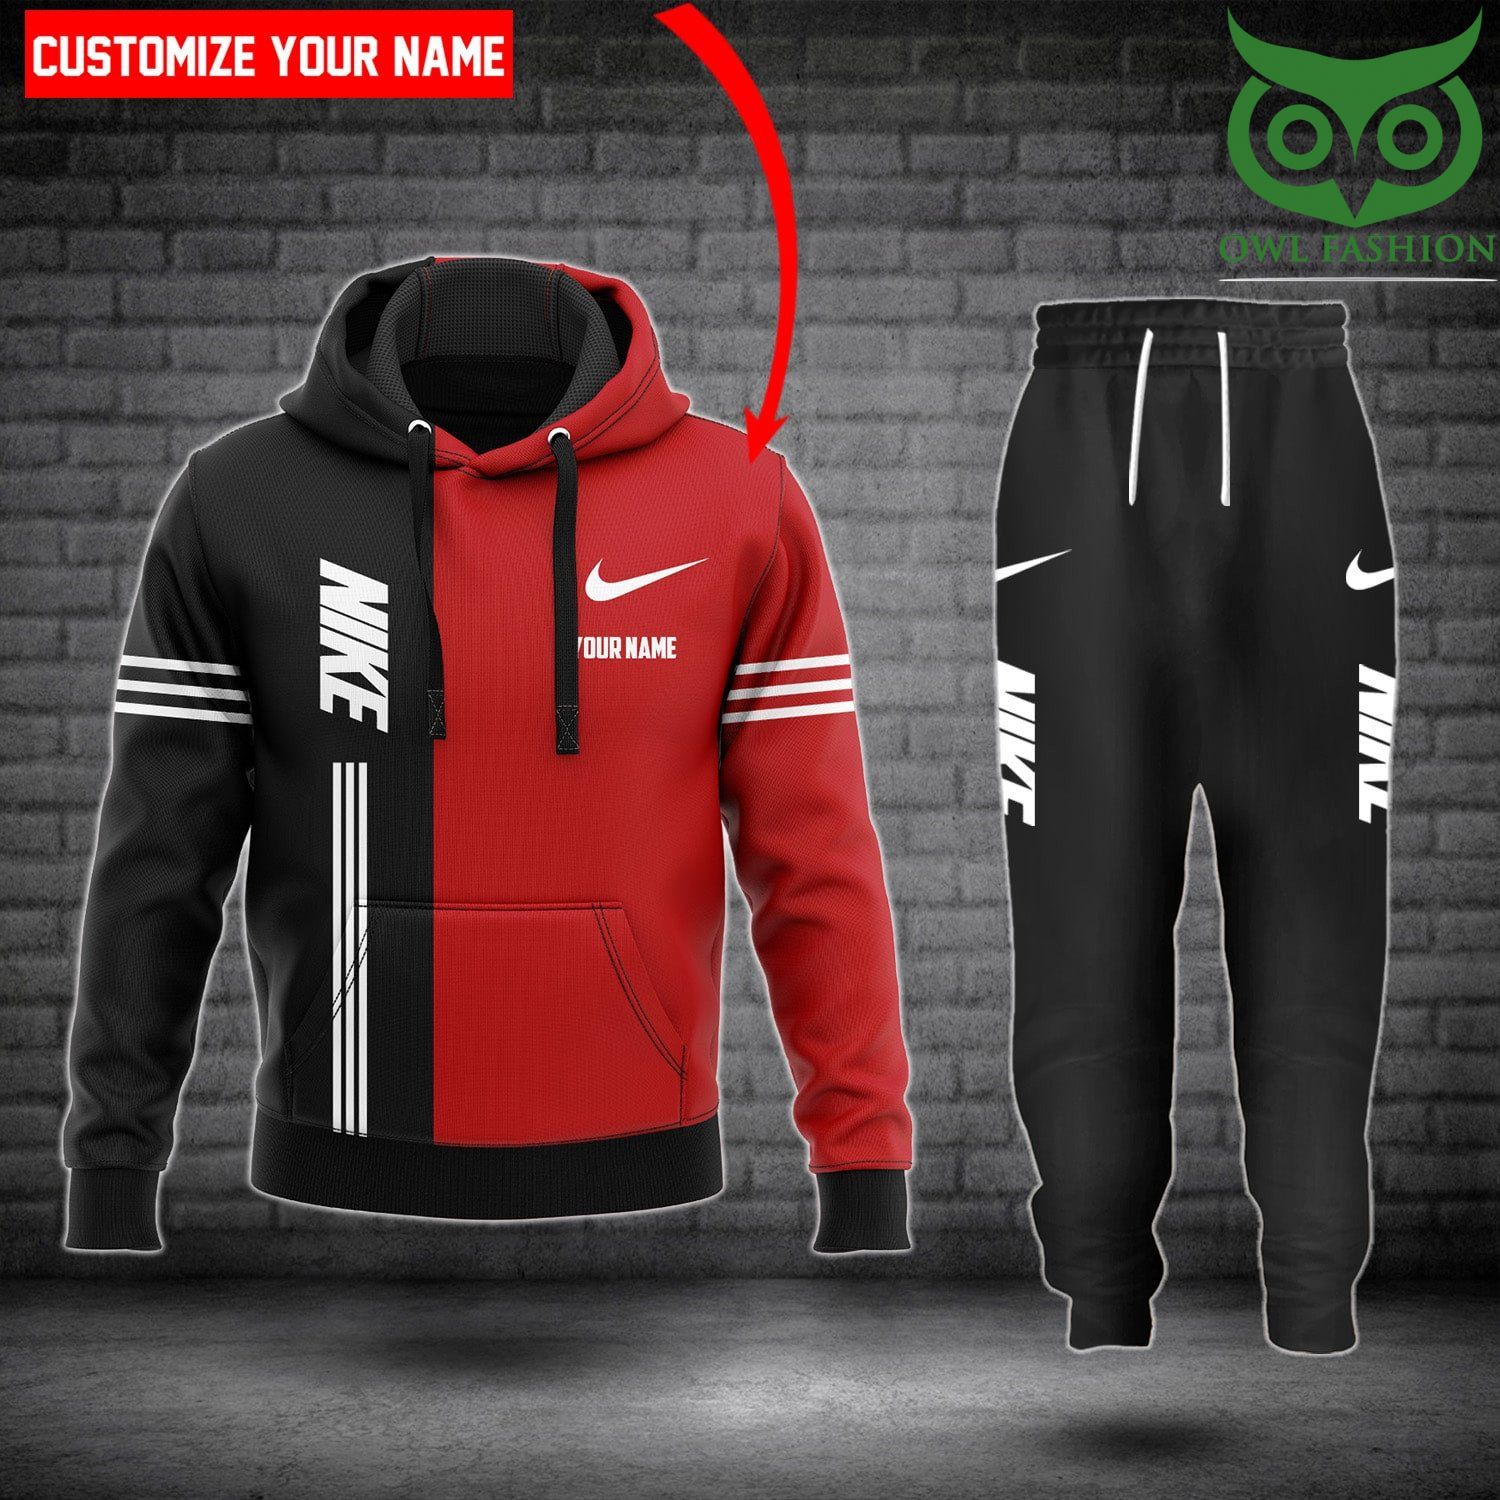 Personalized Nike red and black hoodies and sweatpants